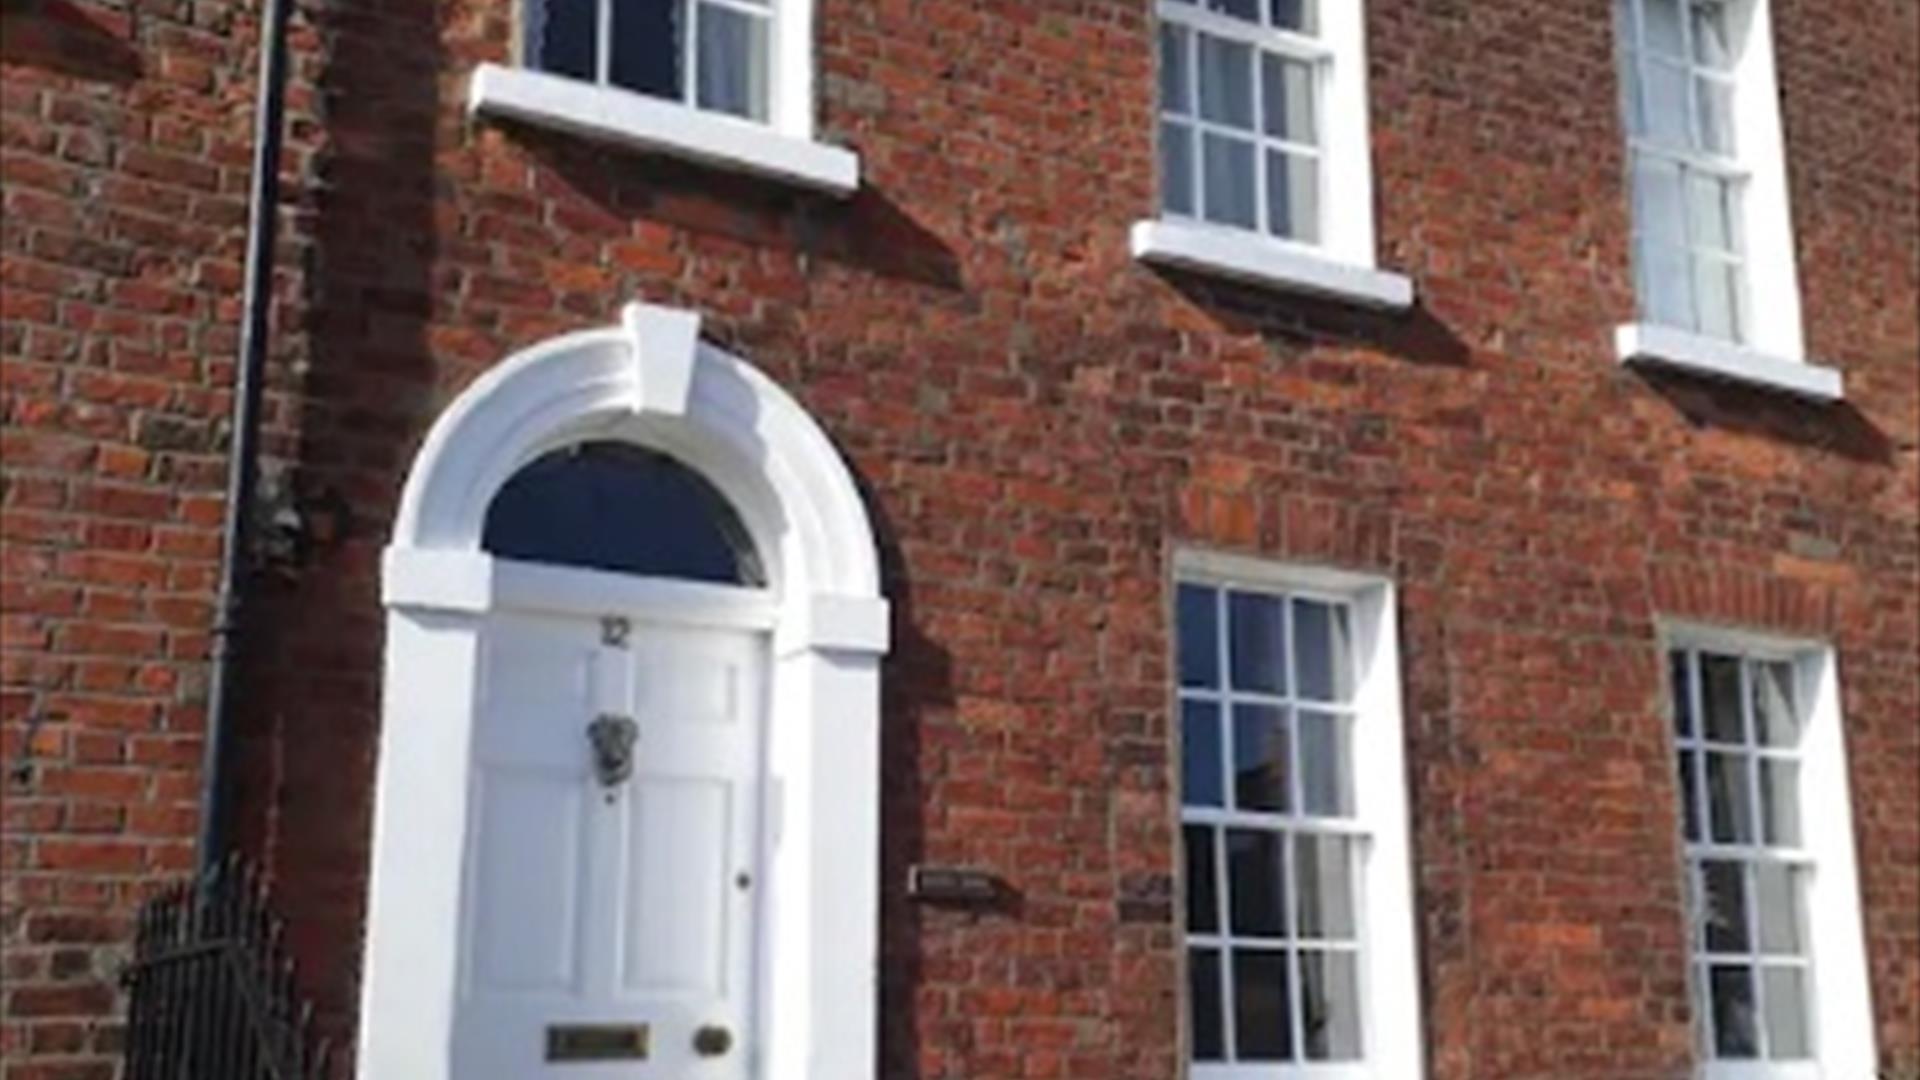 Image shows outside of property which is built in Georgian style with a white front door and sash windows. There are 2 small steps up to front door.